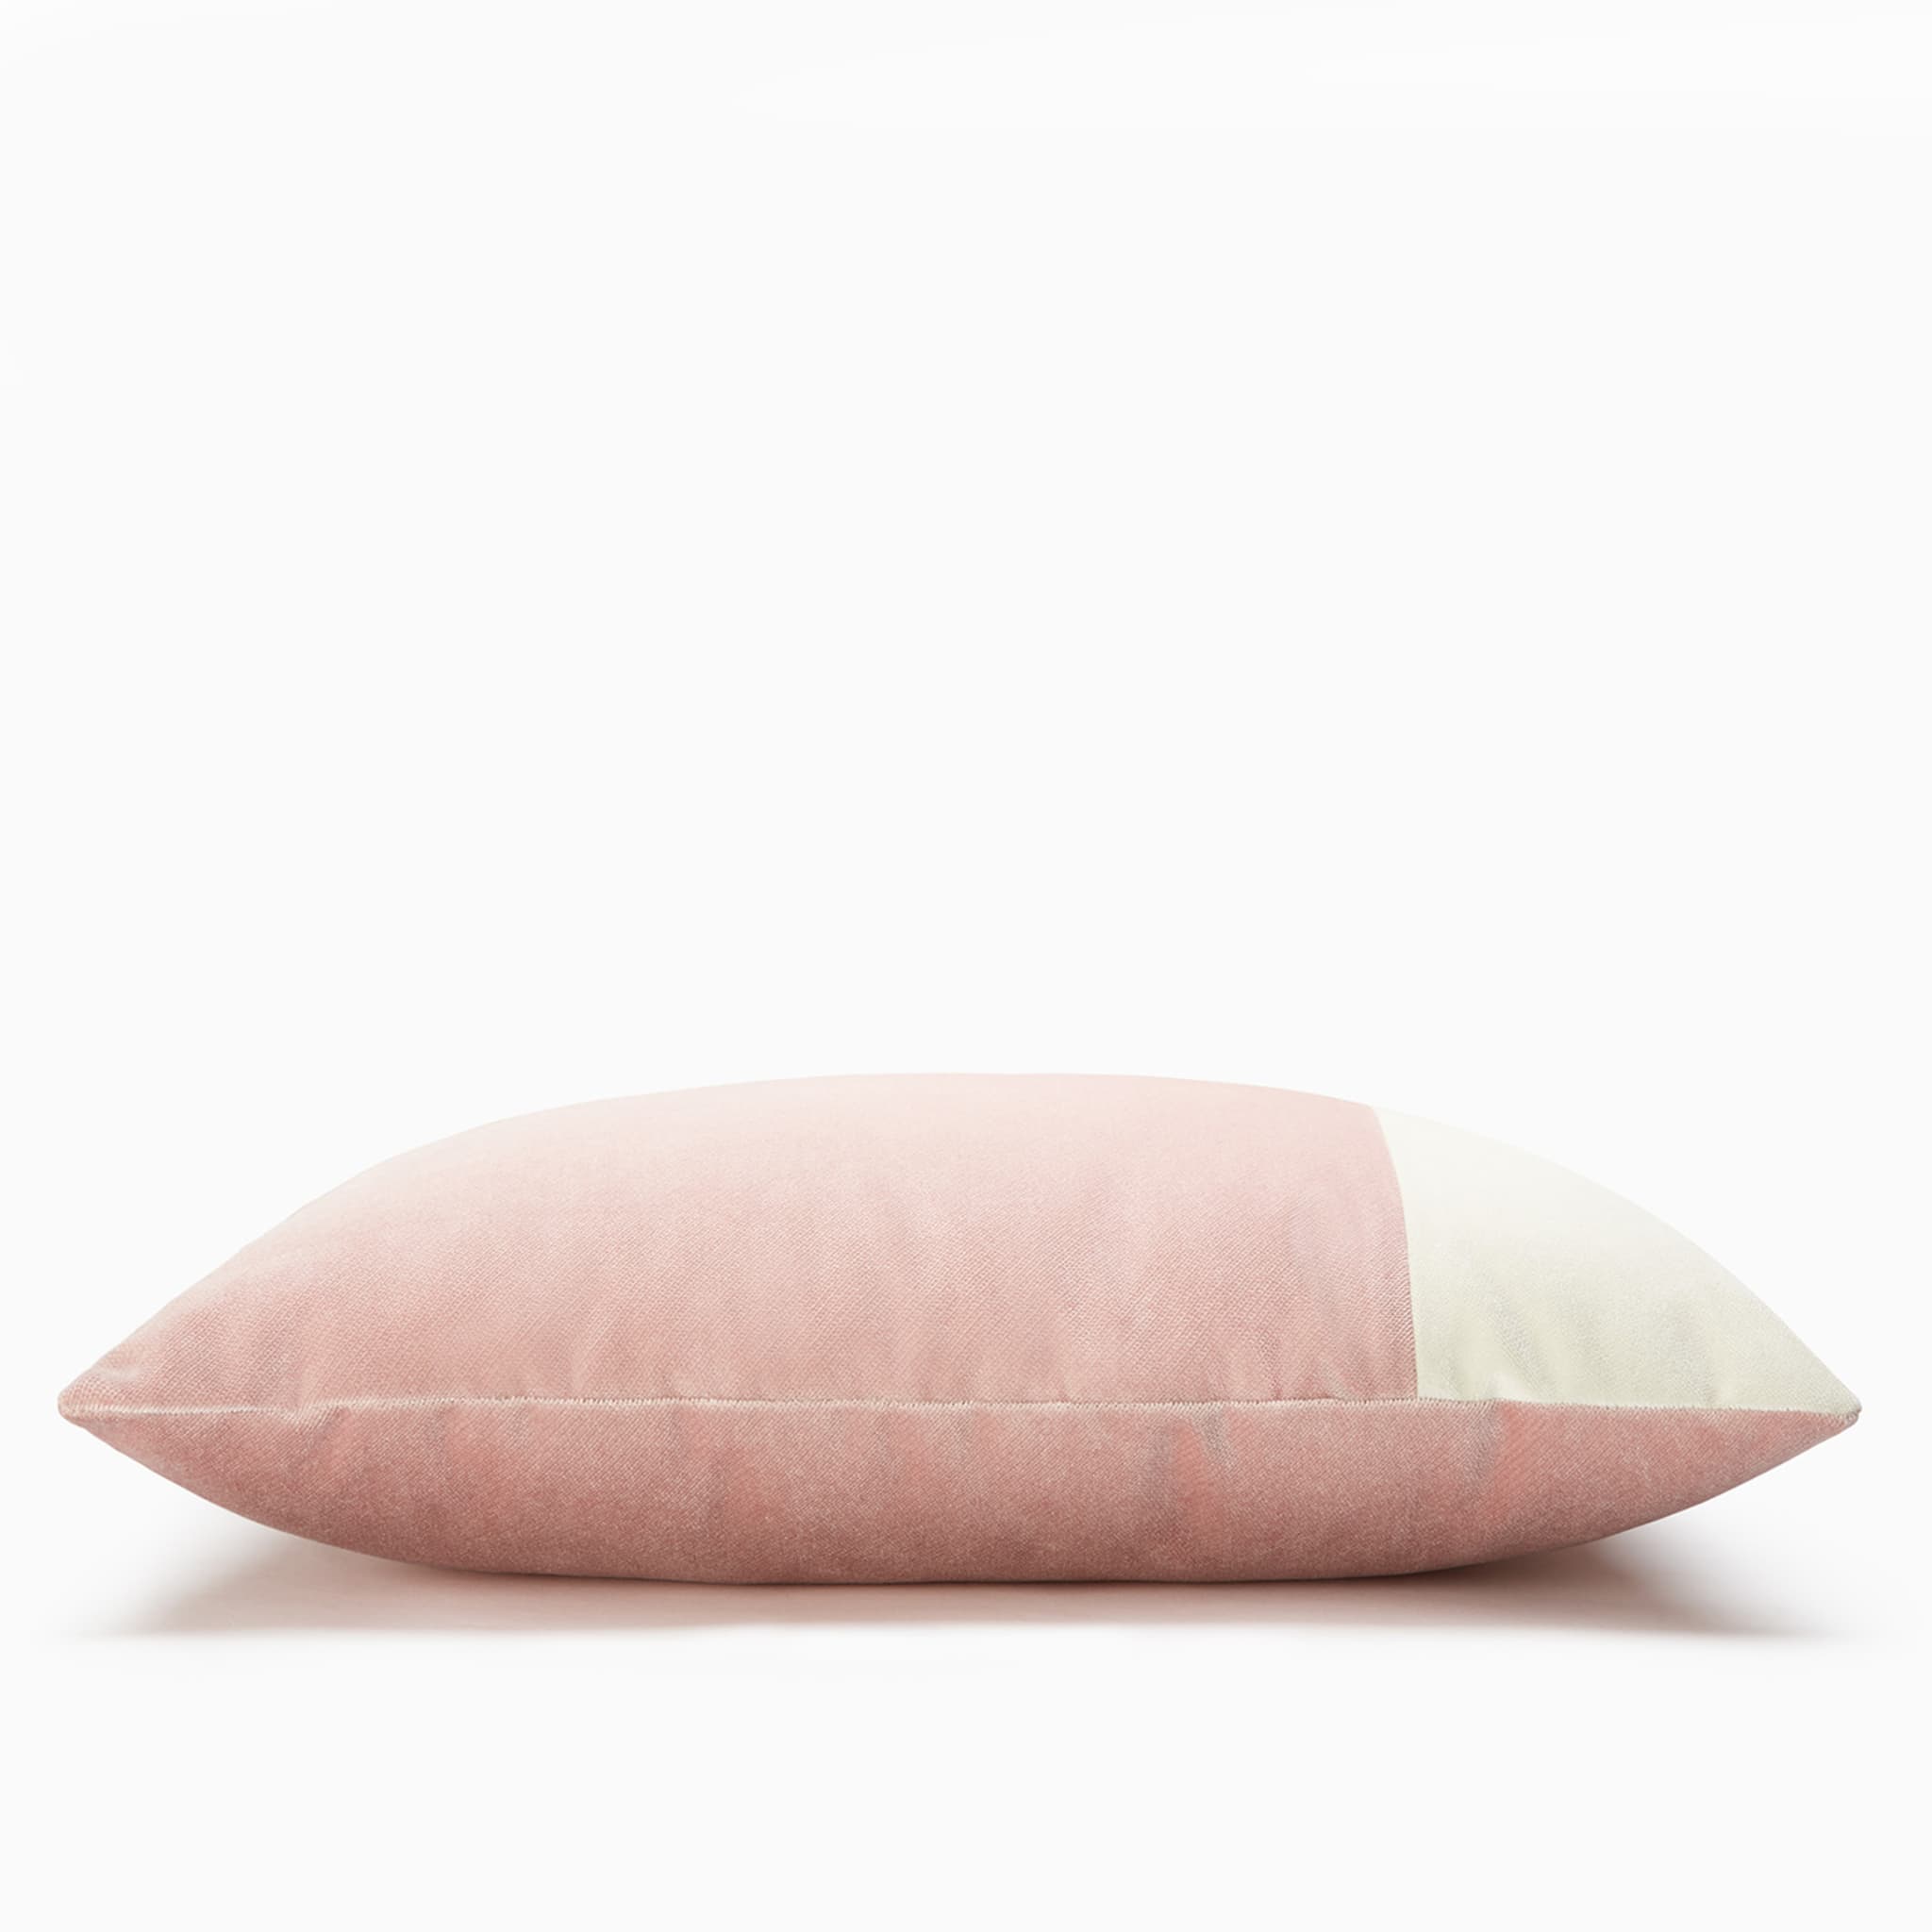 Double Pink and White Rectangular Cushion - Alternative view 1